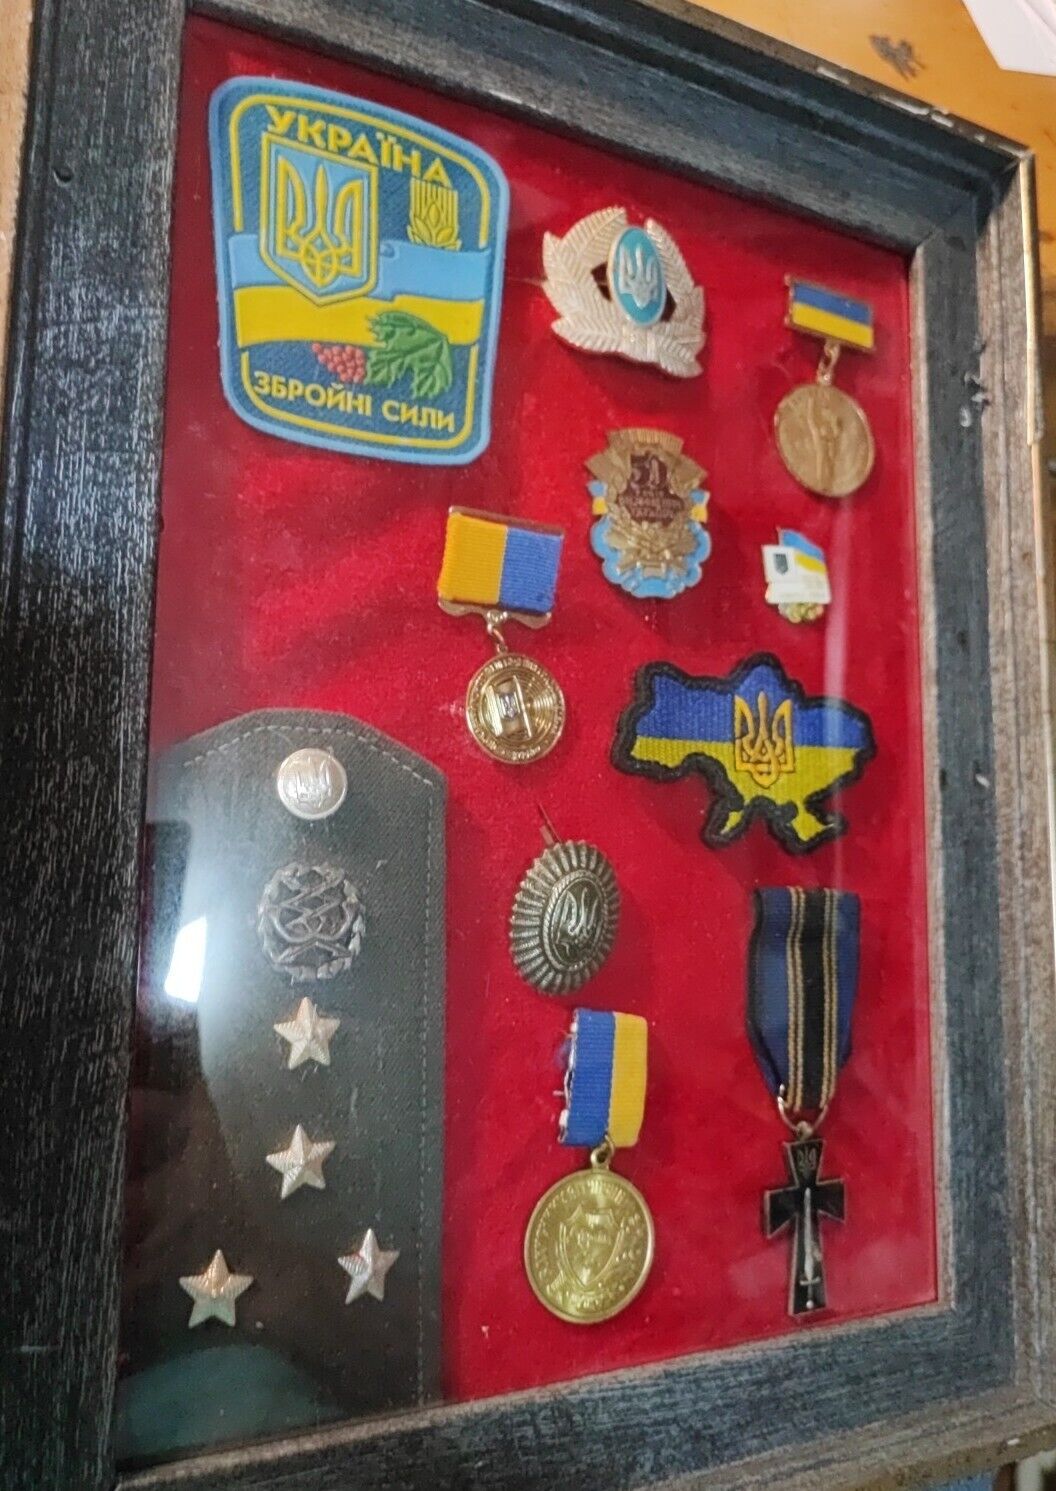 Ukranian Army Officer group medals in frame